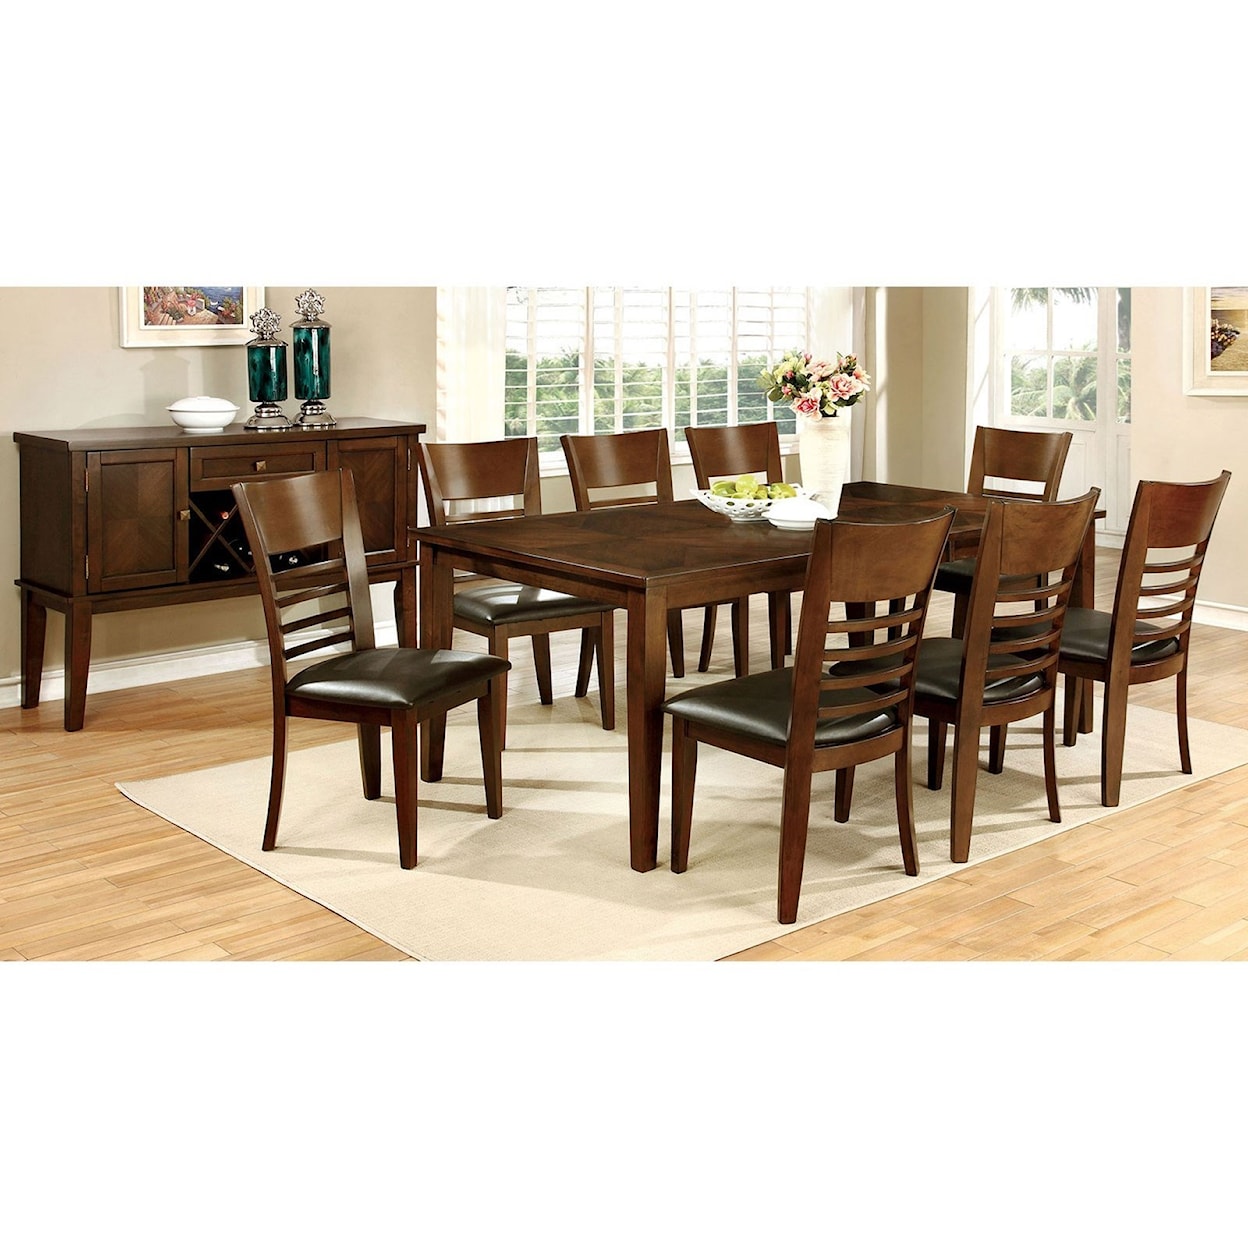 FUSA Hillsview Dining Table and Chair Set 